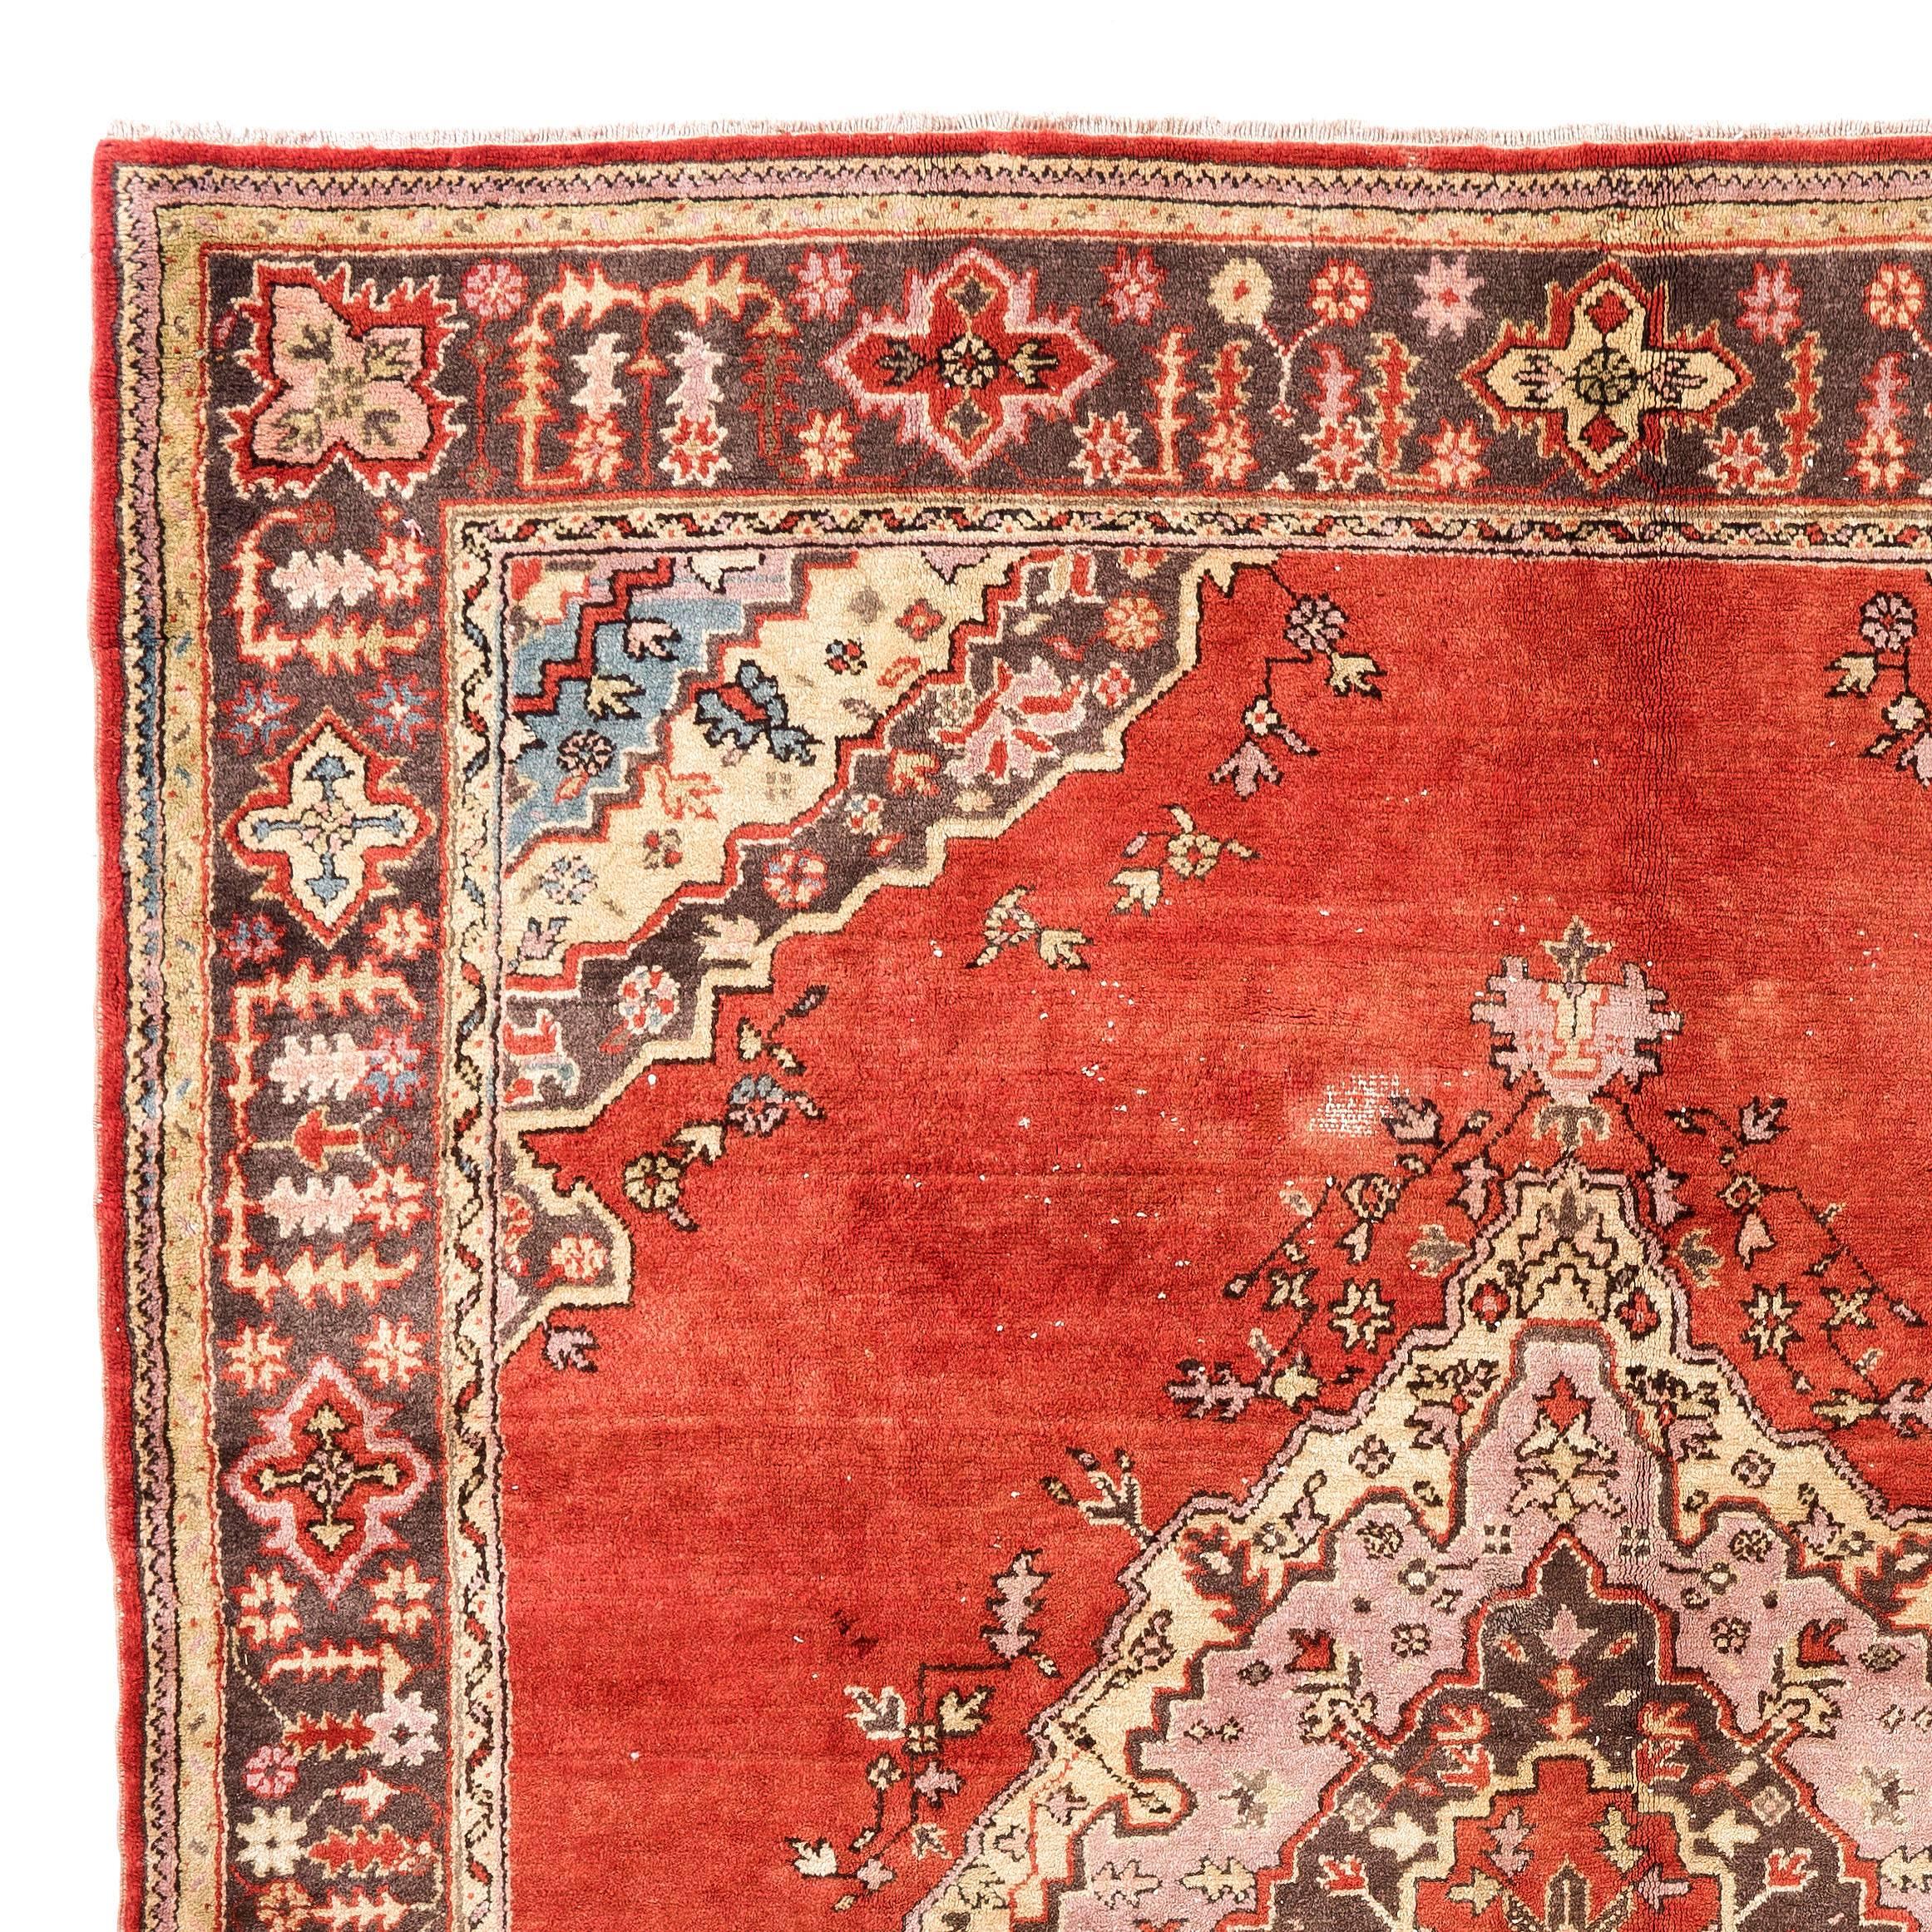 An antique Oushak rug from the first half of the 20th century with a rare square size of 8x9.5 ft. It rug has medium wool pile on wool foundation, is in good condition, very clean and sturdy.

It features a large lozenge-shaped medallion in red,